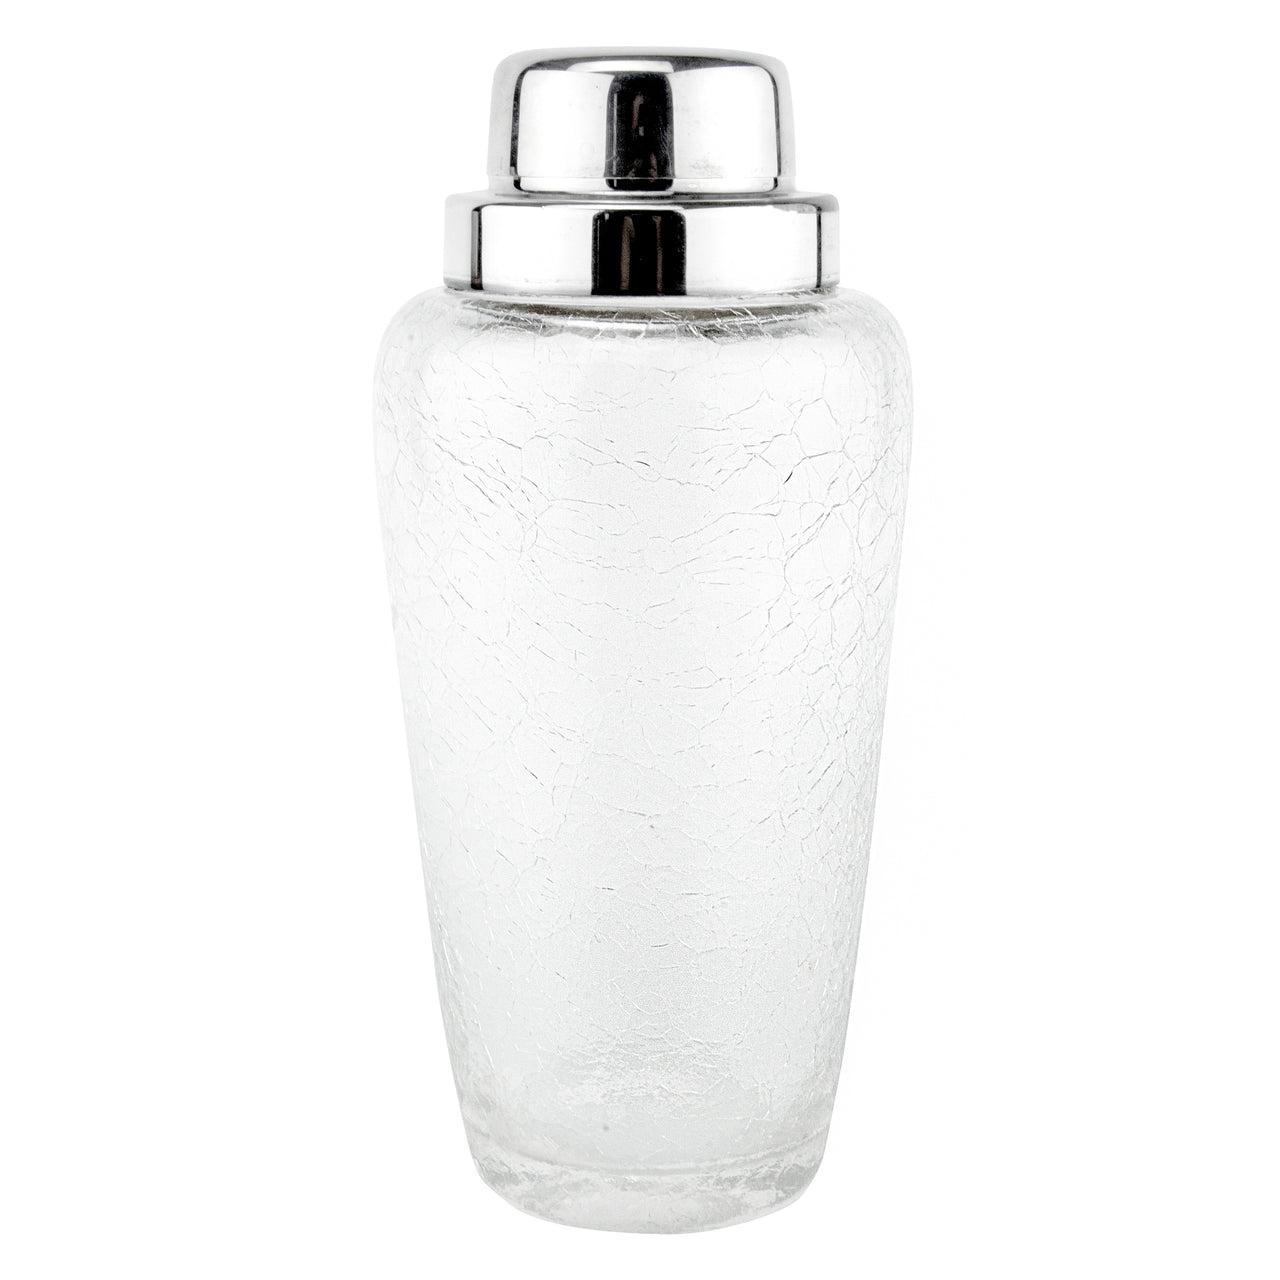 Kristall Crackle Glass Cocktail Shaker